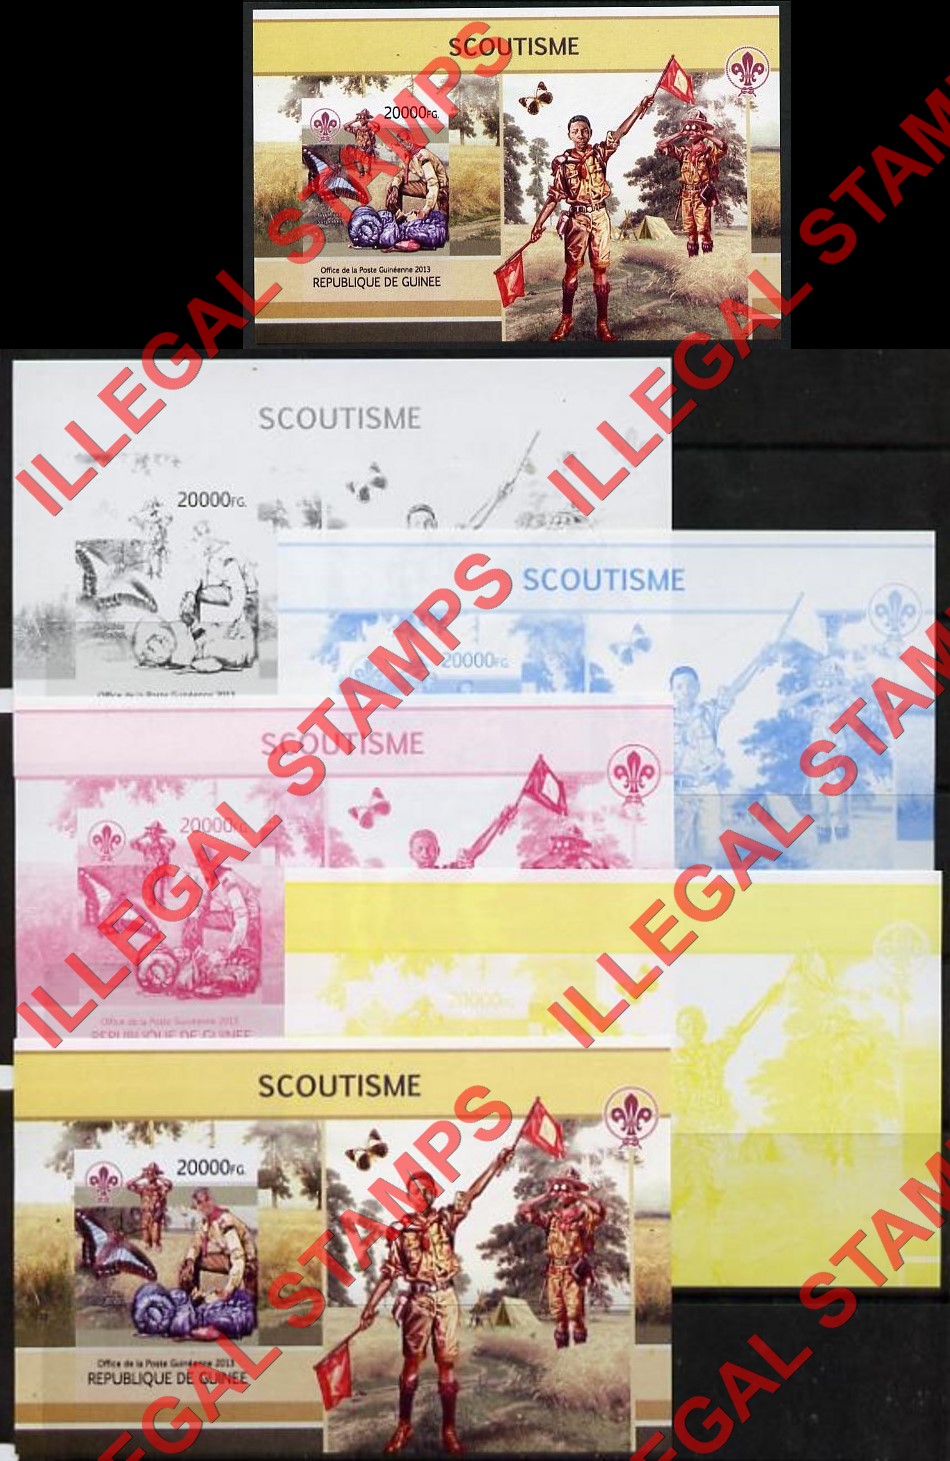 Guinea Republic 2013 Scouting Scoutisme Counterfeit Illegal Stamp with Matching Color Proofs (Set 3)